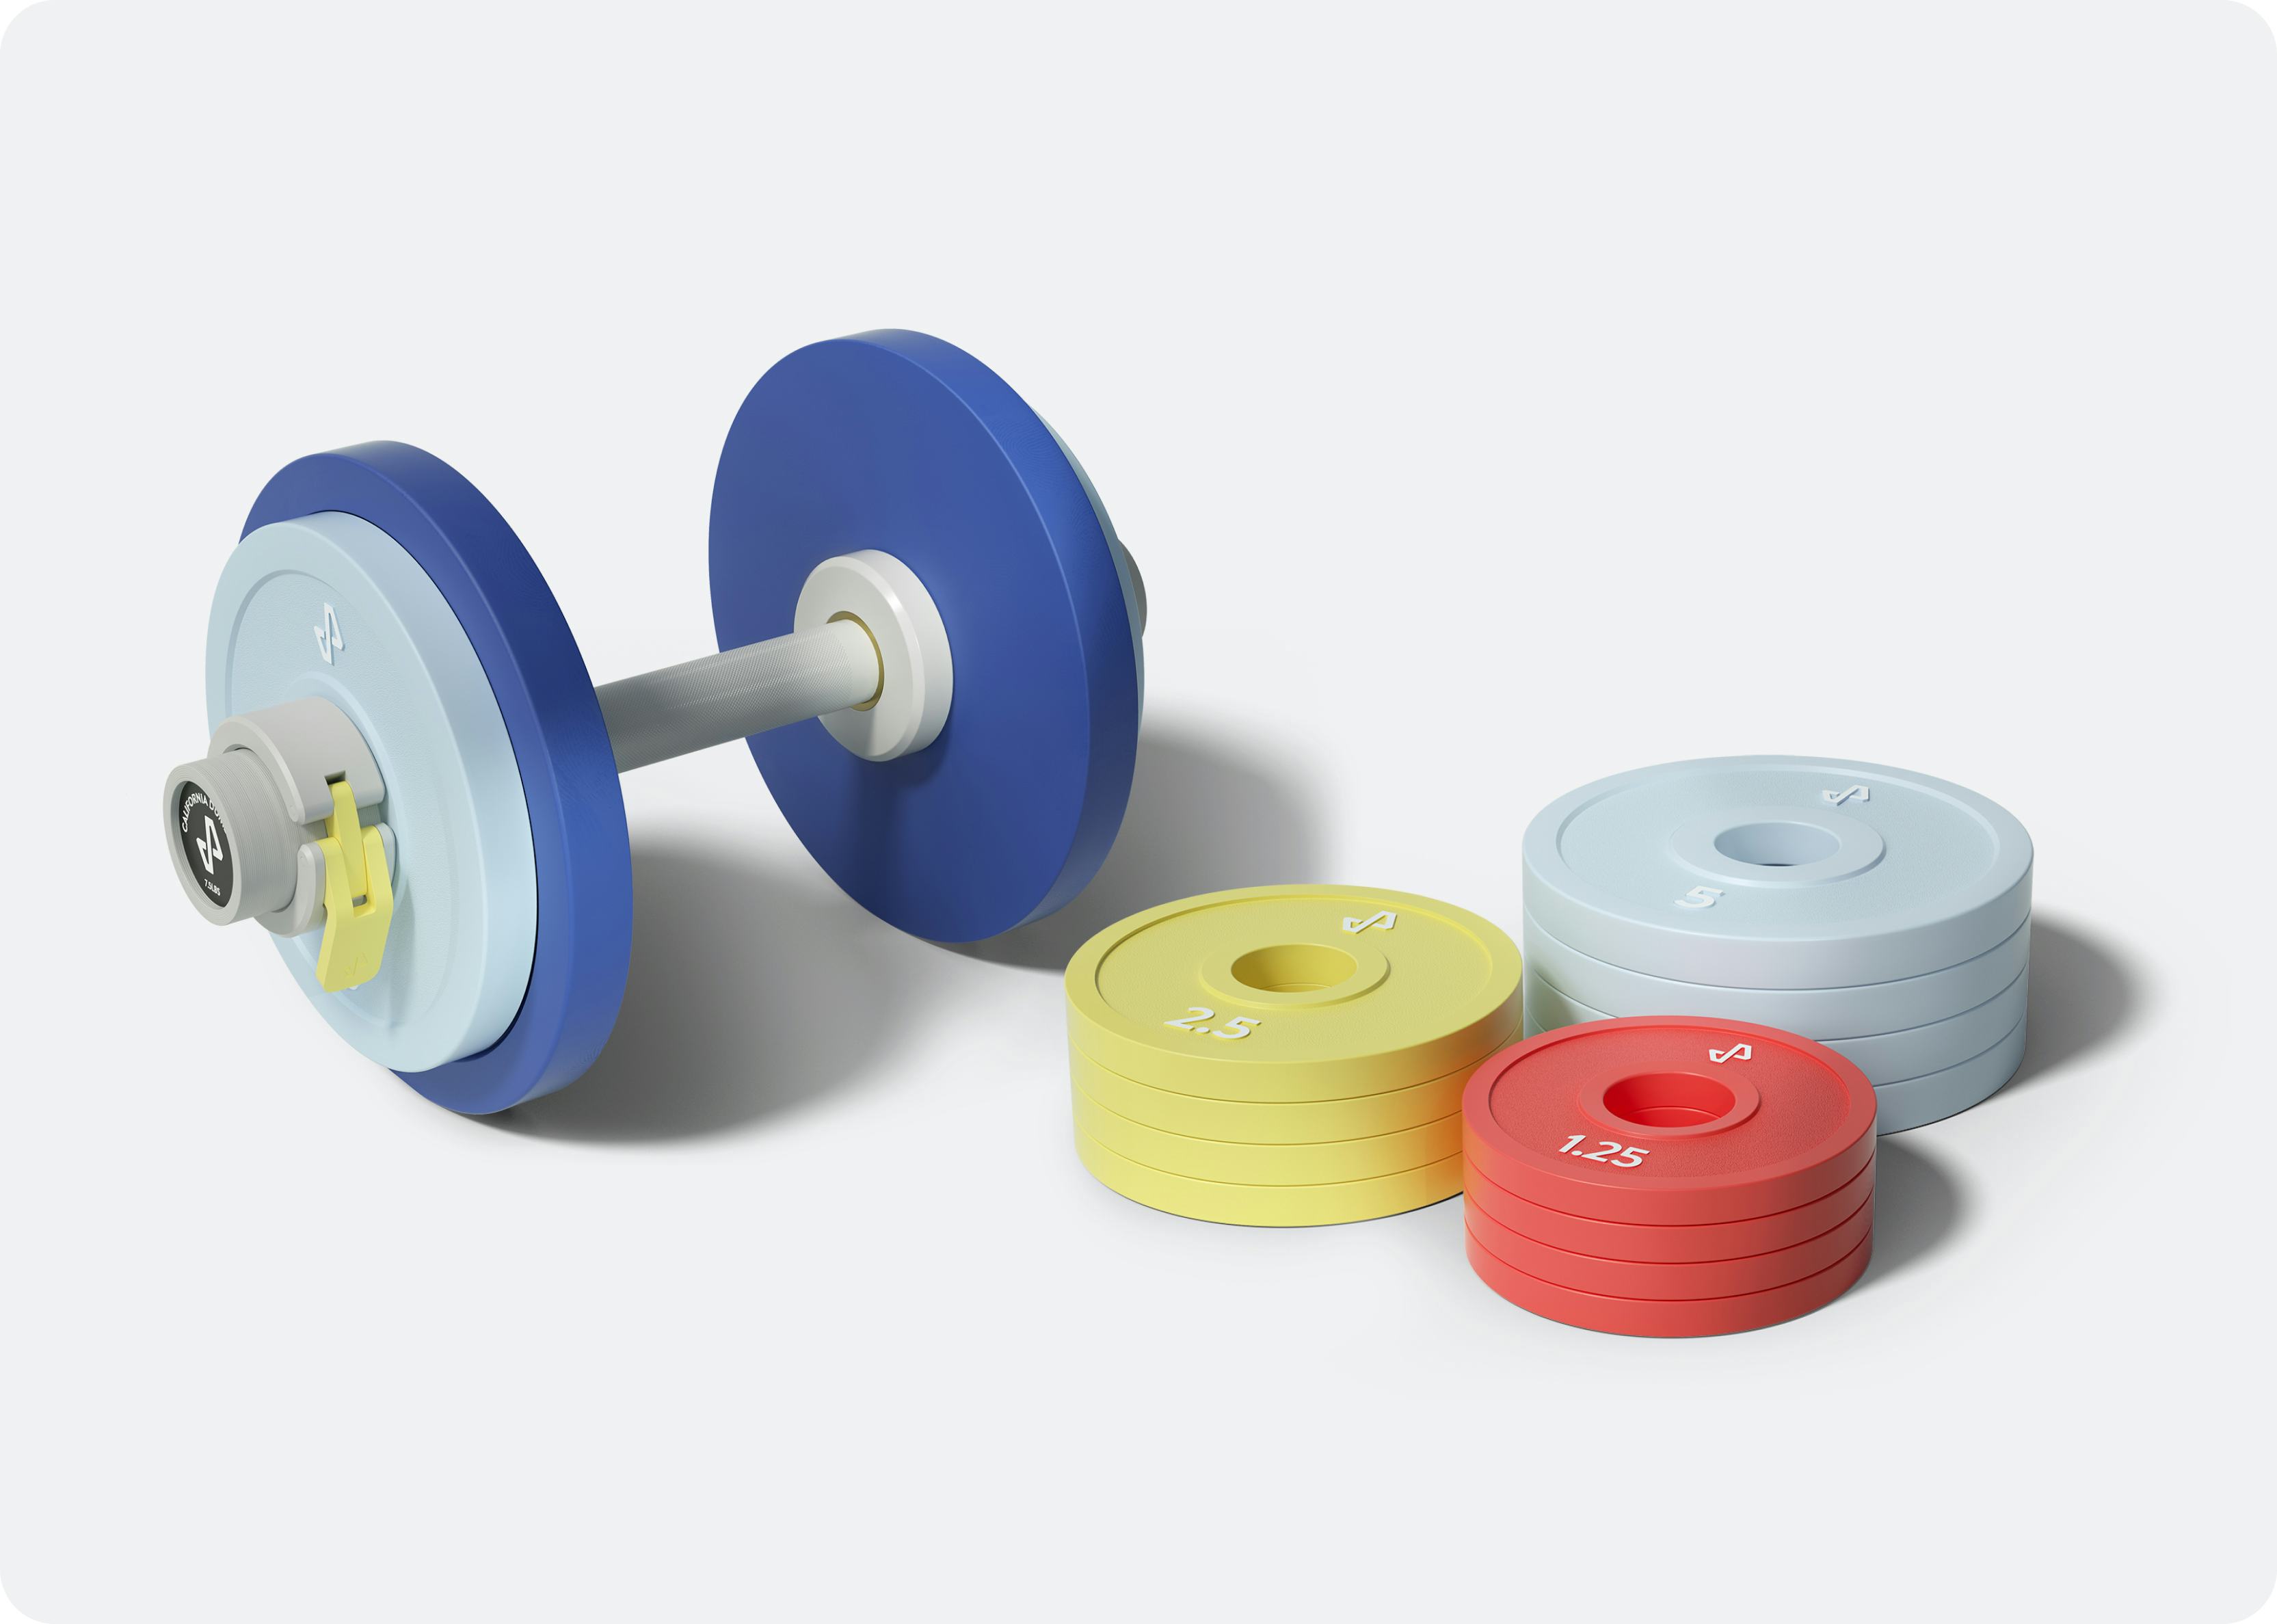 Loaded dumbbell with additional weight plates